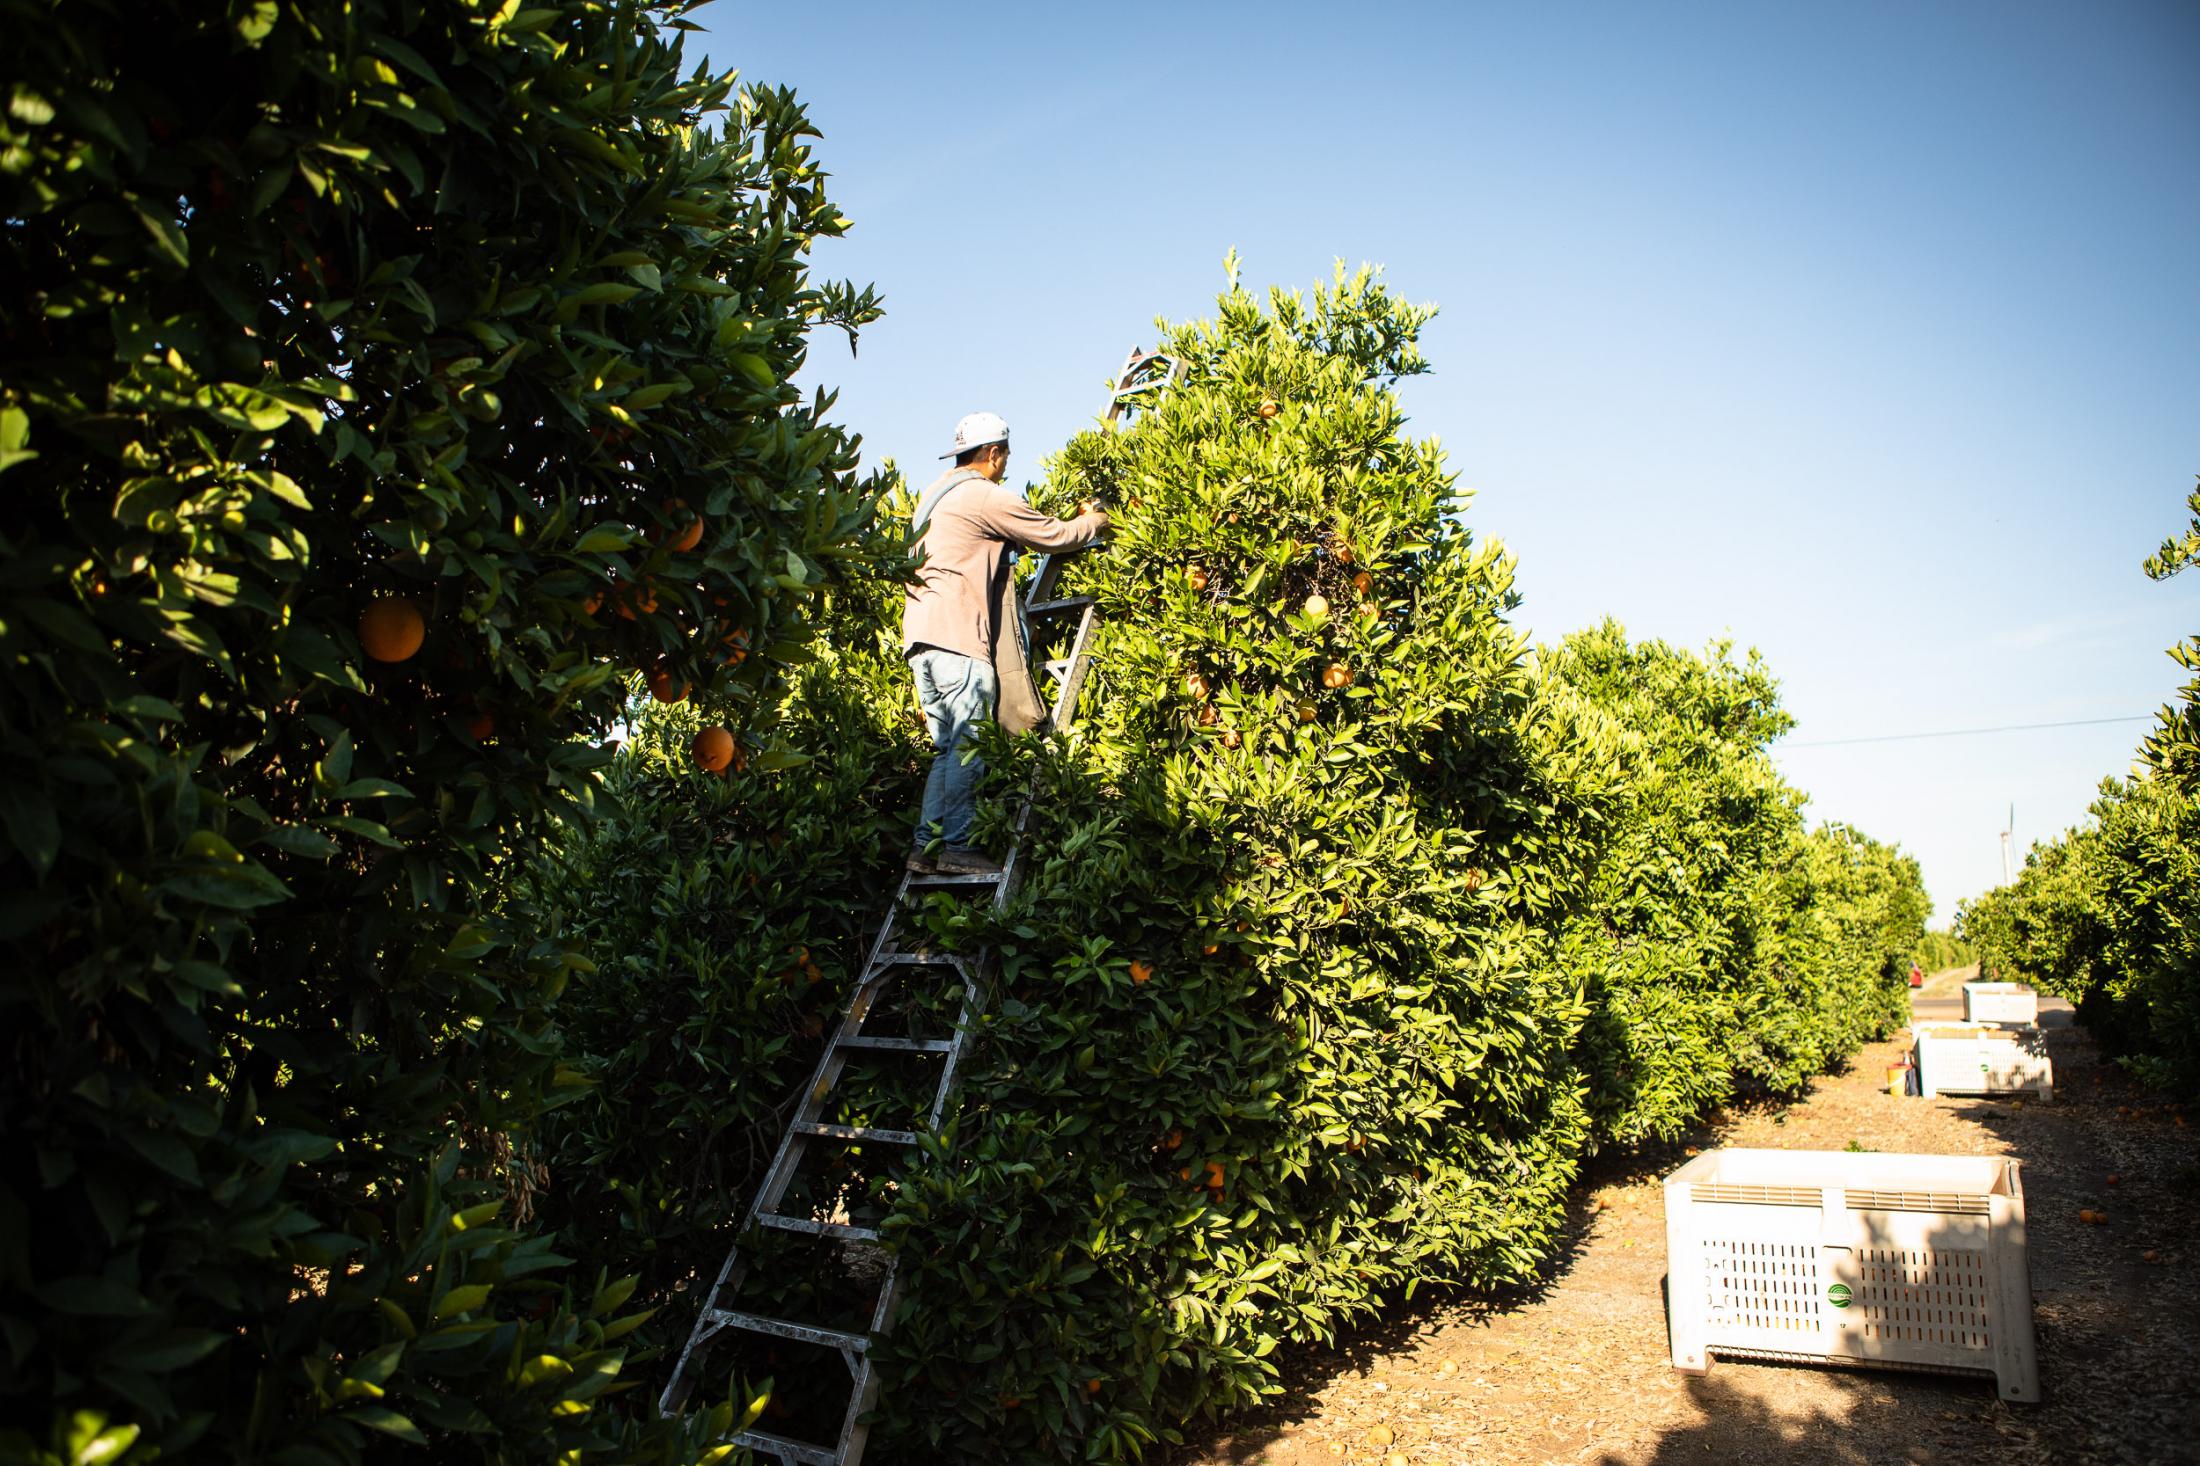  - Pesticides poisoning  -  Farm workers, picking orange in near by fields. 